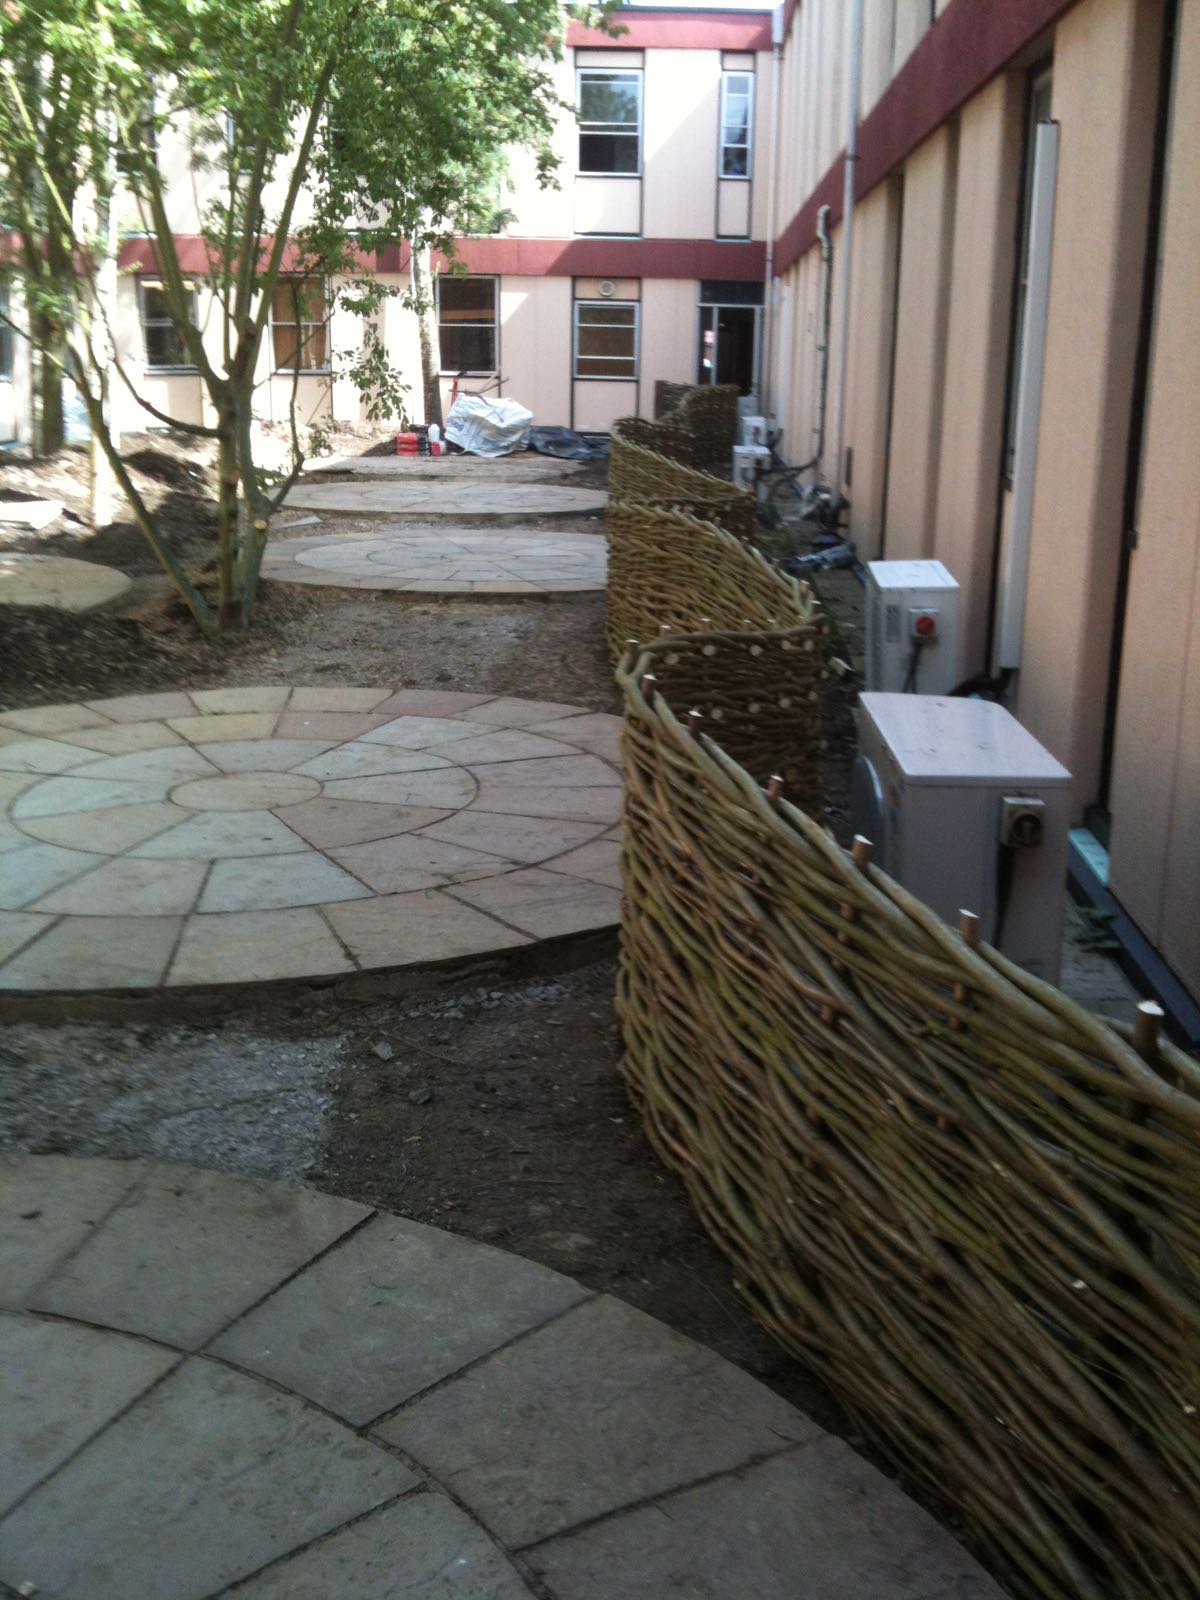 Bespoke Woven Willow Fence